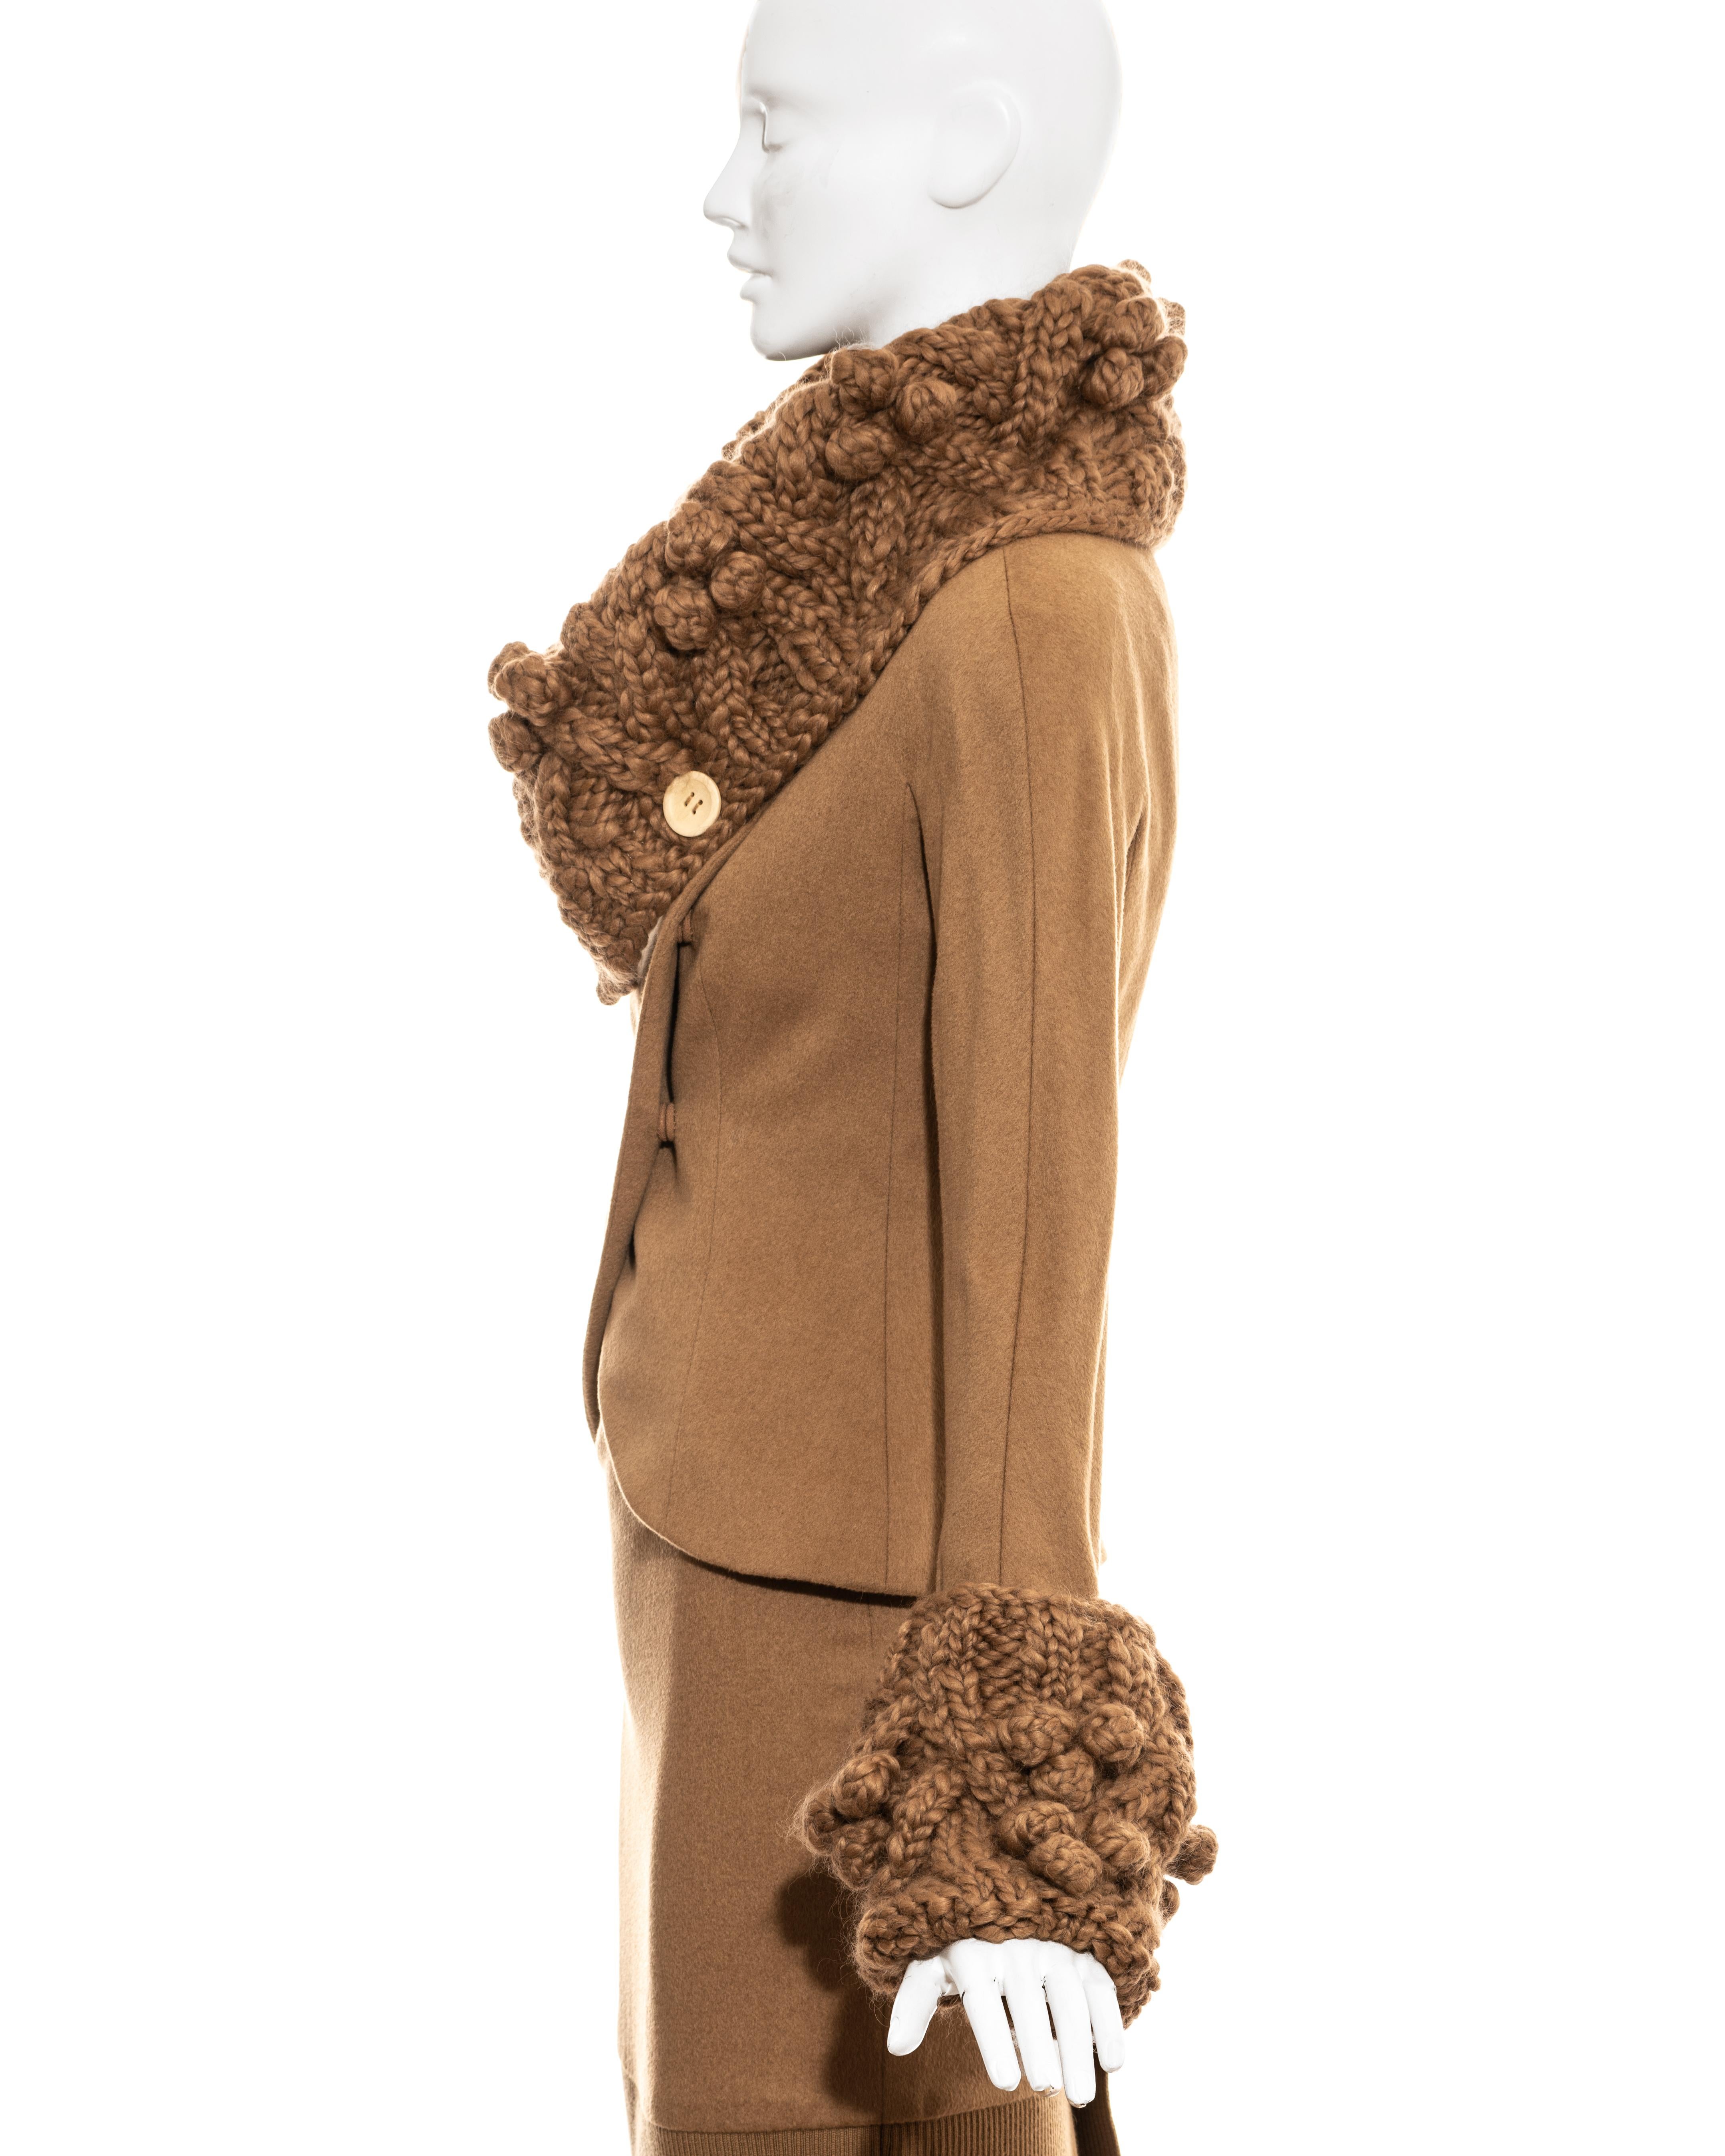 Women's Christian Dior by John Galliano camel wool skirt suit, fw 1999 For Sale